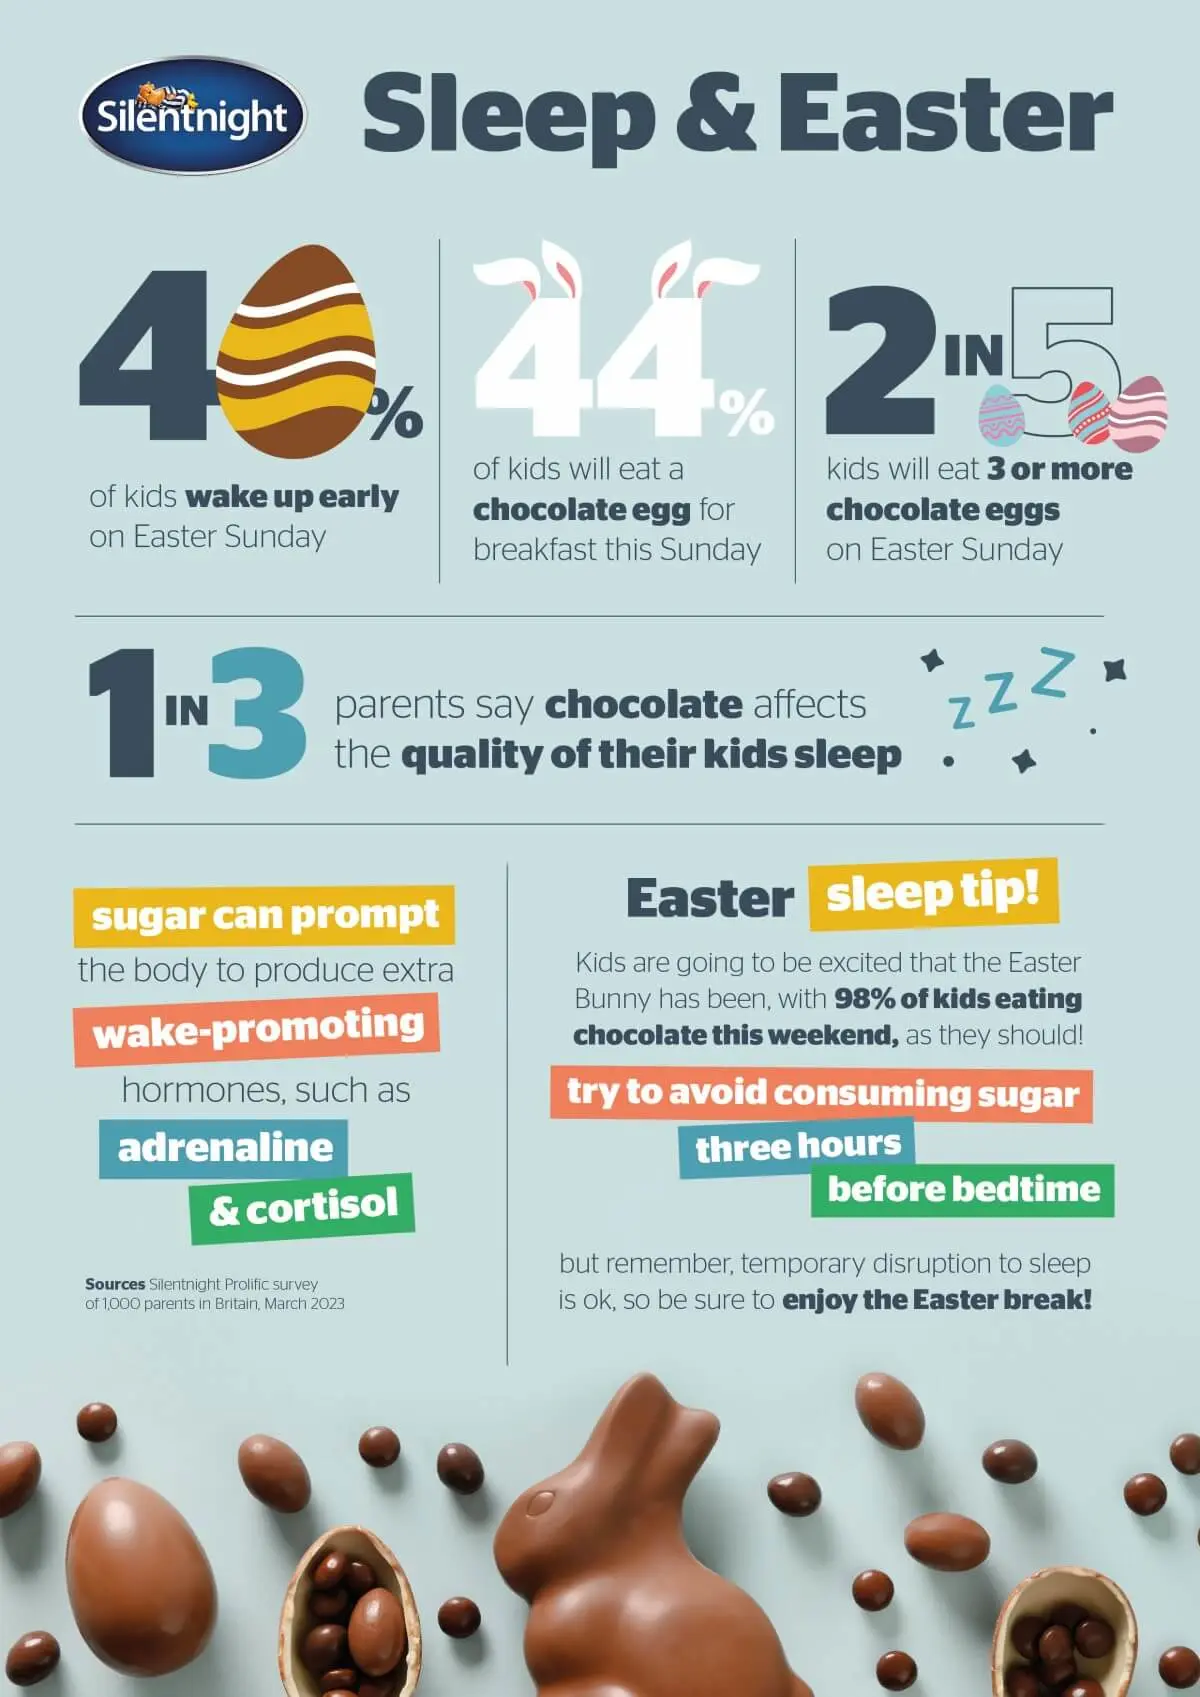 Source: Silentnight Prolific survey of 1,000 parents in Britain, March 2023. 40% of Kids wake up early on Easter Sunday, 44% of kids will eat a chocolate egg for breakfast this Sunday, 2 in 5 kids will eat 3 or more chocolate eggs on Easter Sunday.